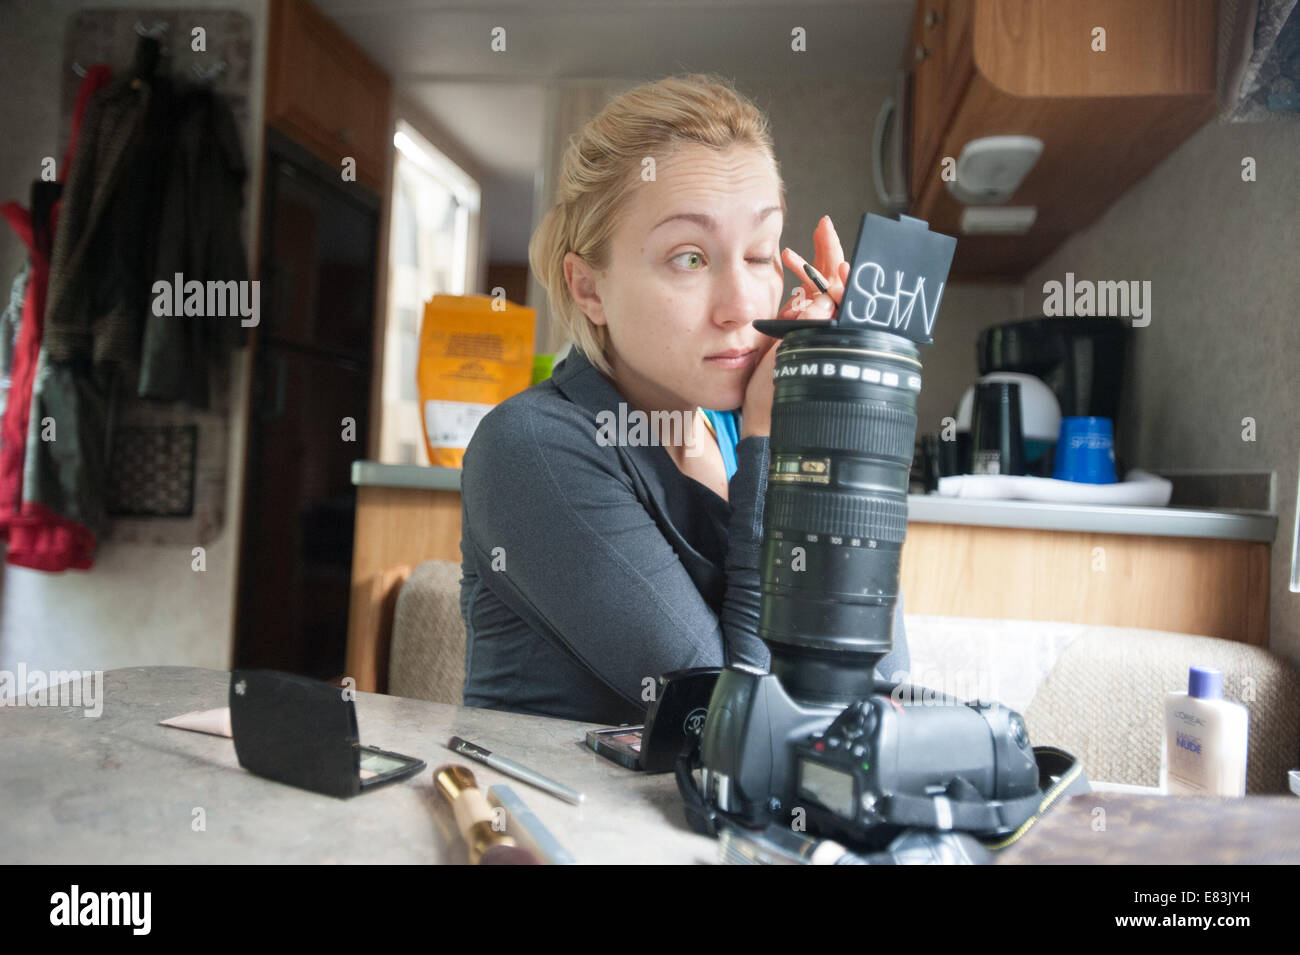 Model applies makeup in RV using camera as mirror stand Stock Photo